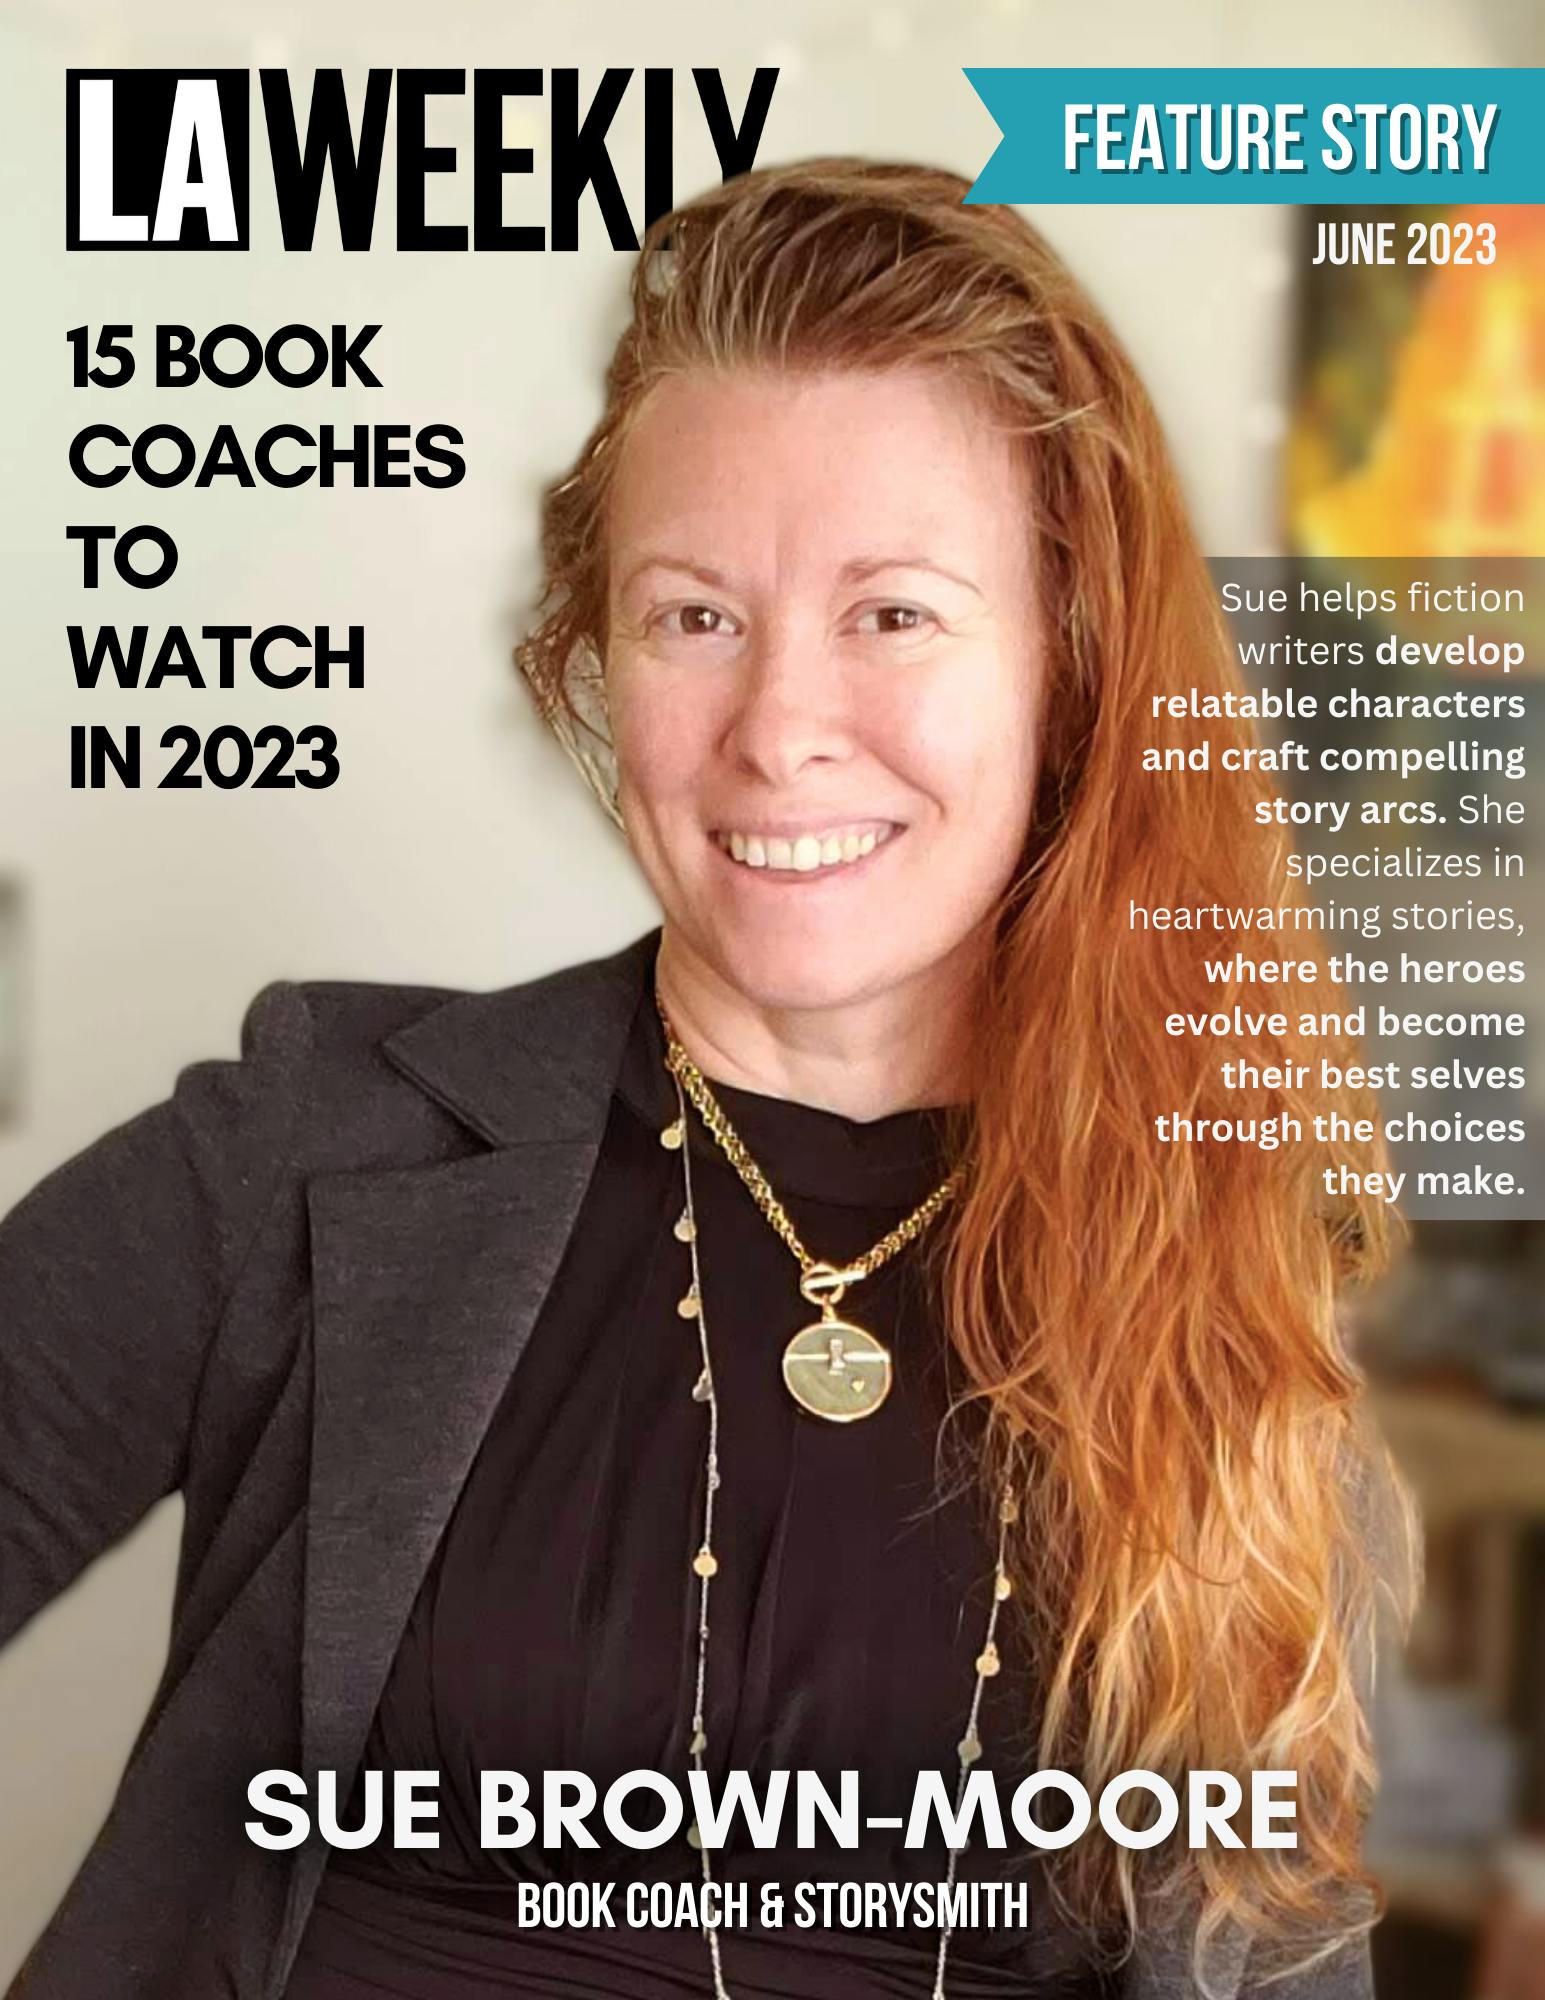 Magazine cover showing Sue Brown-Moore with the title: 15 book coaches to watch in 2023